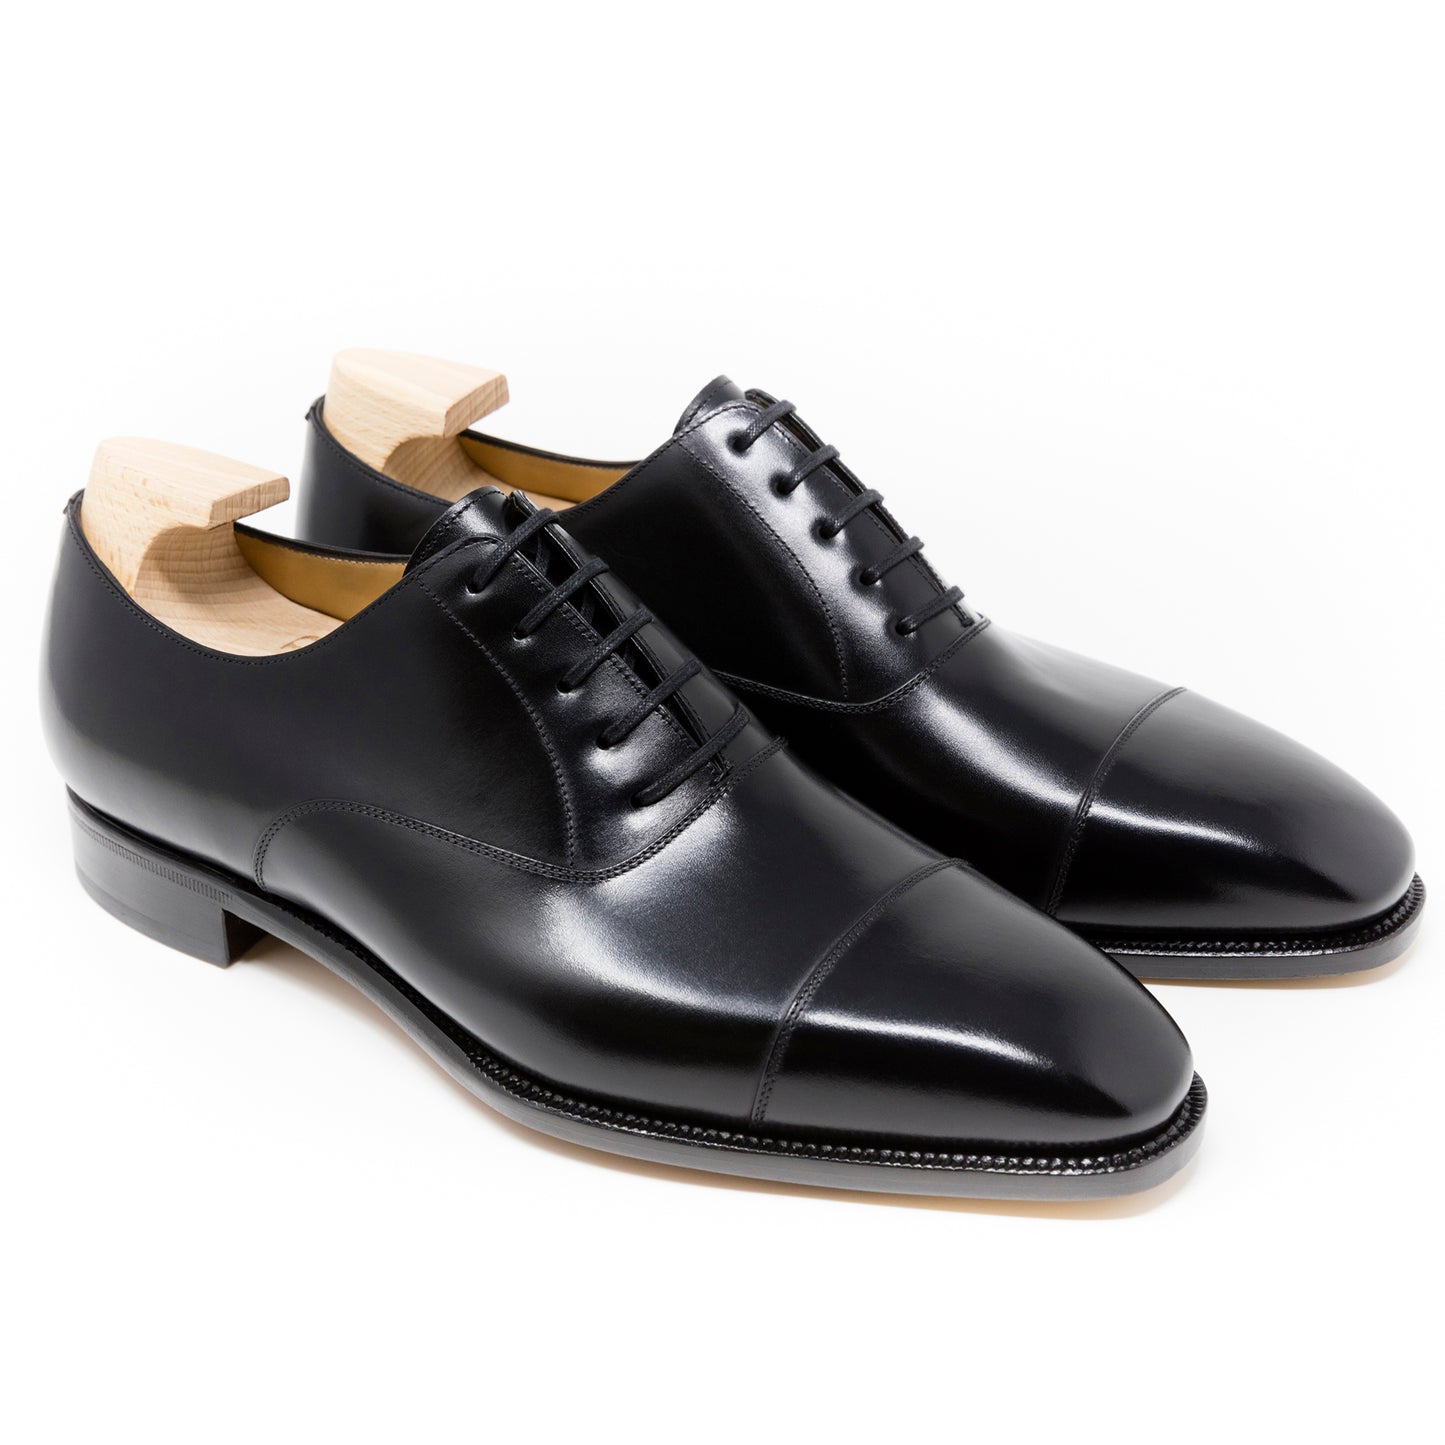 TLB Mallorca leather shoes 128 / PICASSO / BOXCALF BLACK